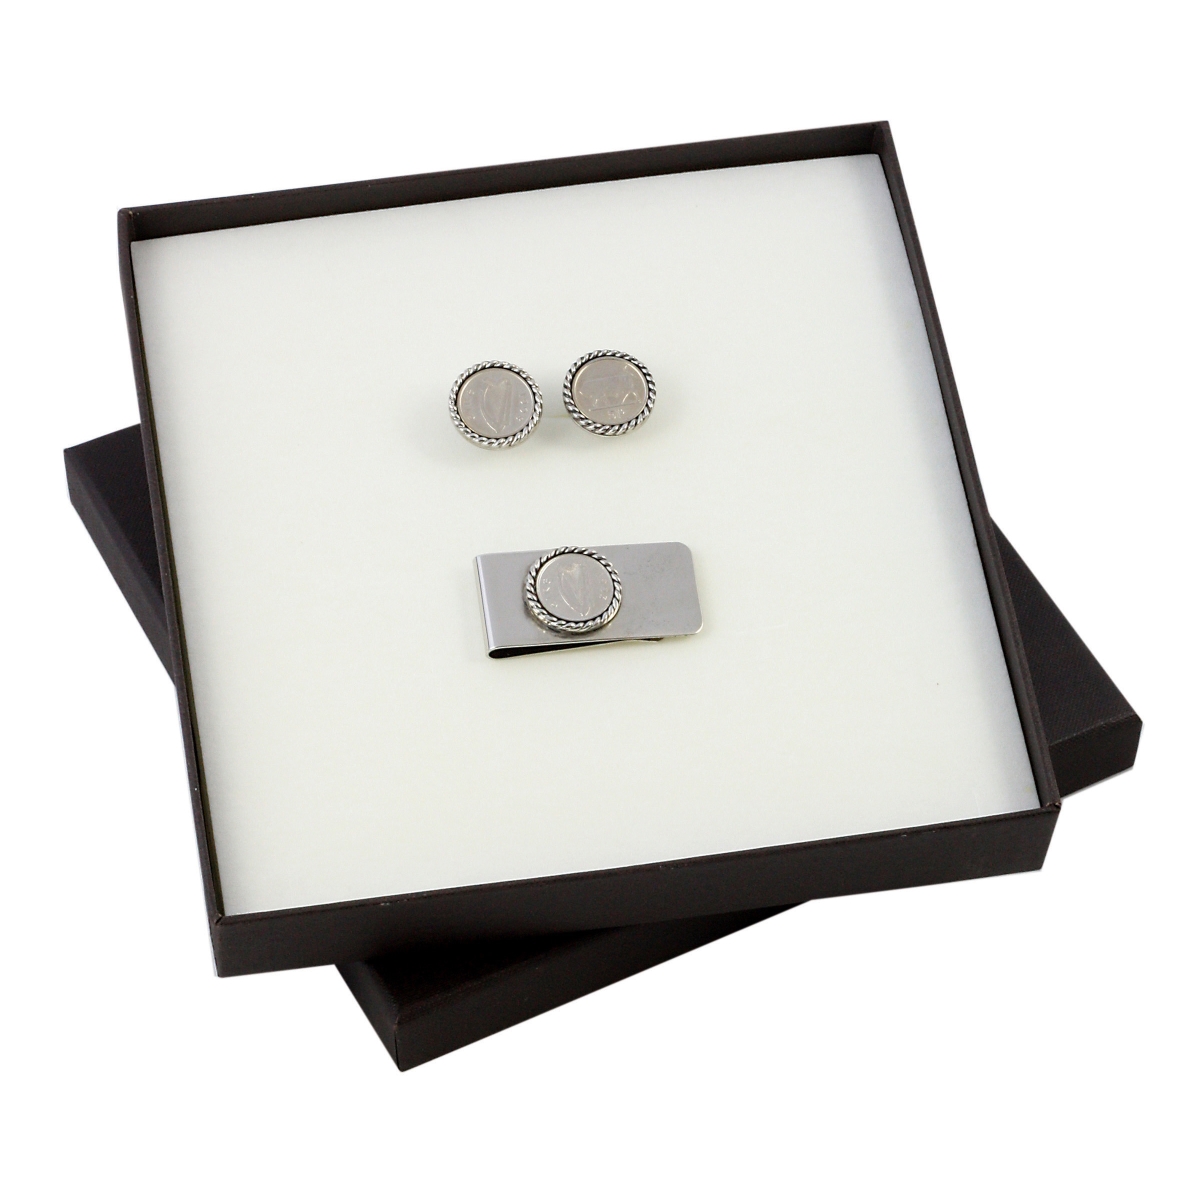 Picture of UPM Global 13071 Irish 5 Pence Silver Tone Rope Coin Cuff Links & Coin Money Clip Boxed Gift Set